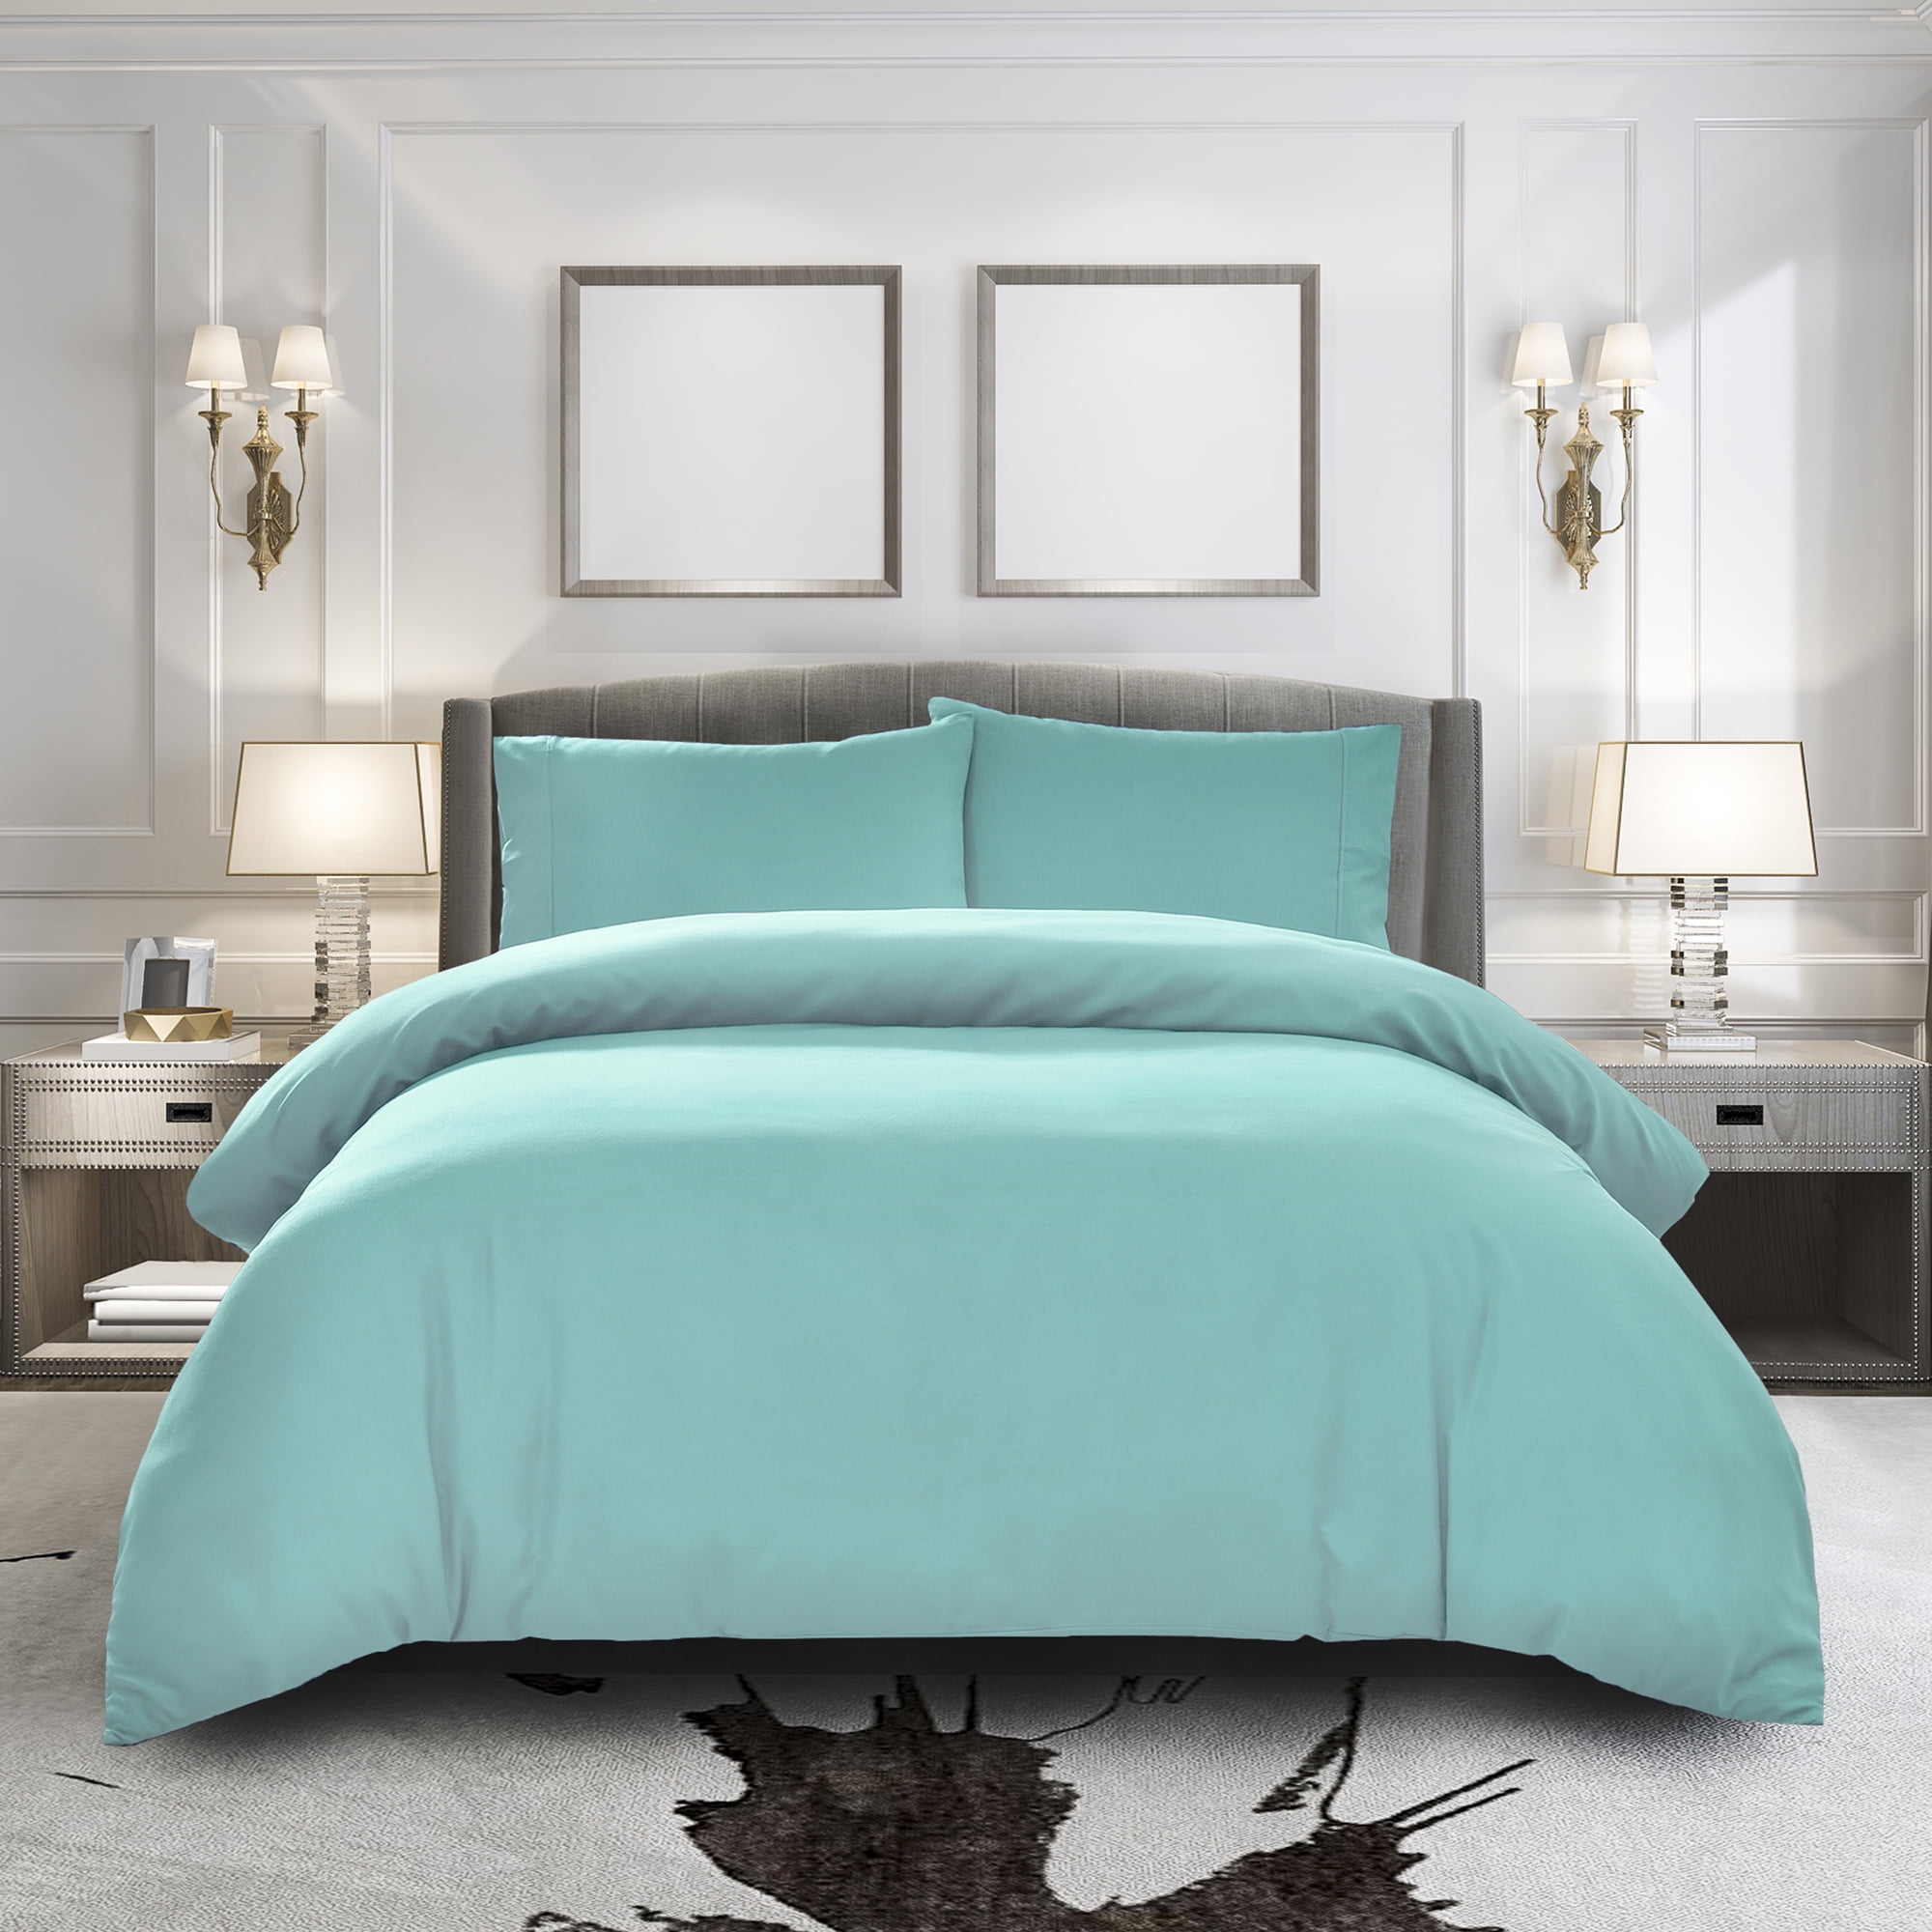 Effortless® Bedding SUPERSOFT Luxury Hotel & Spa Quality 100